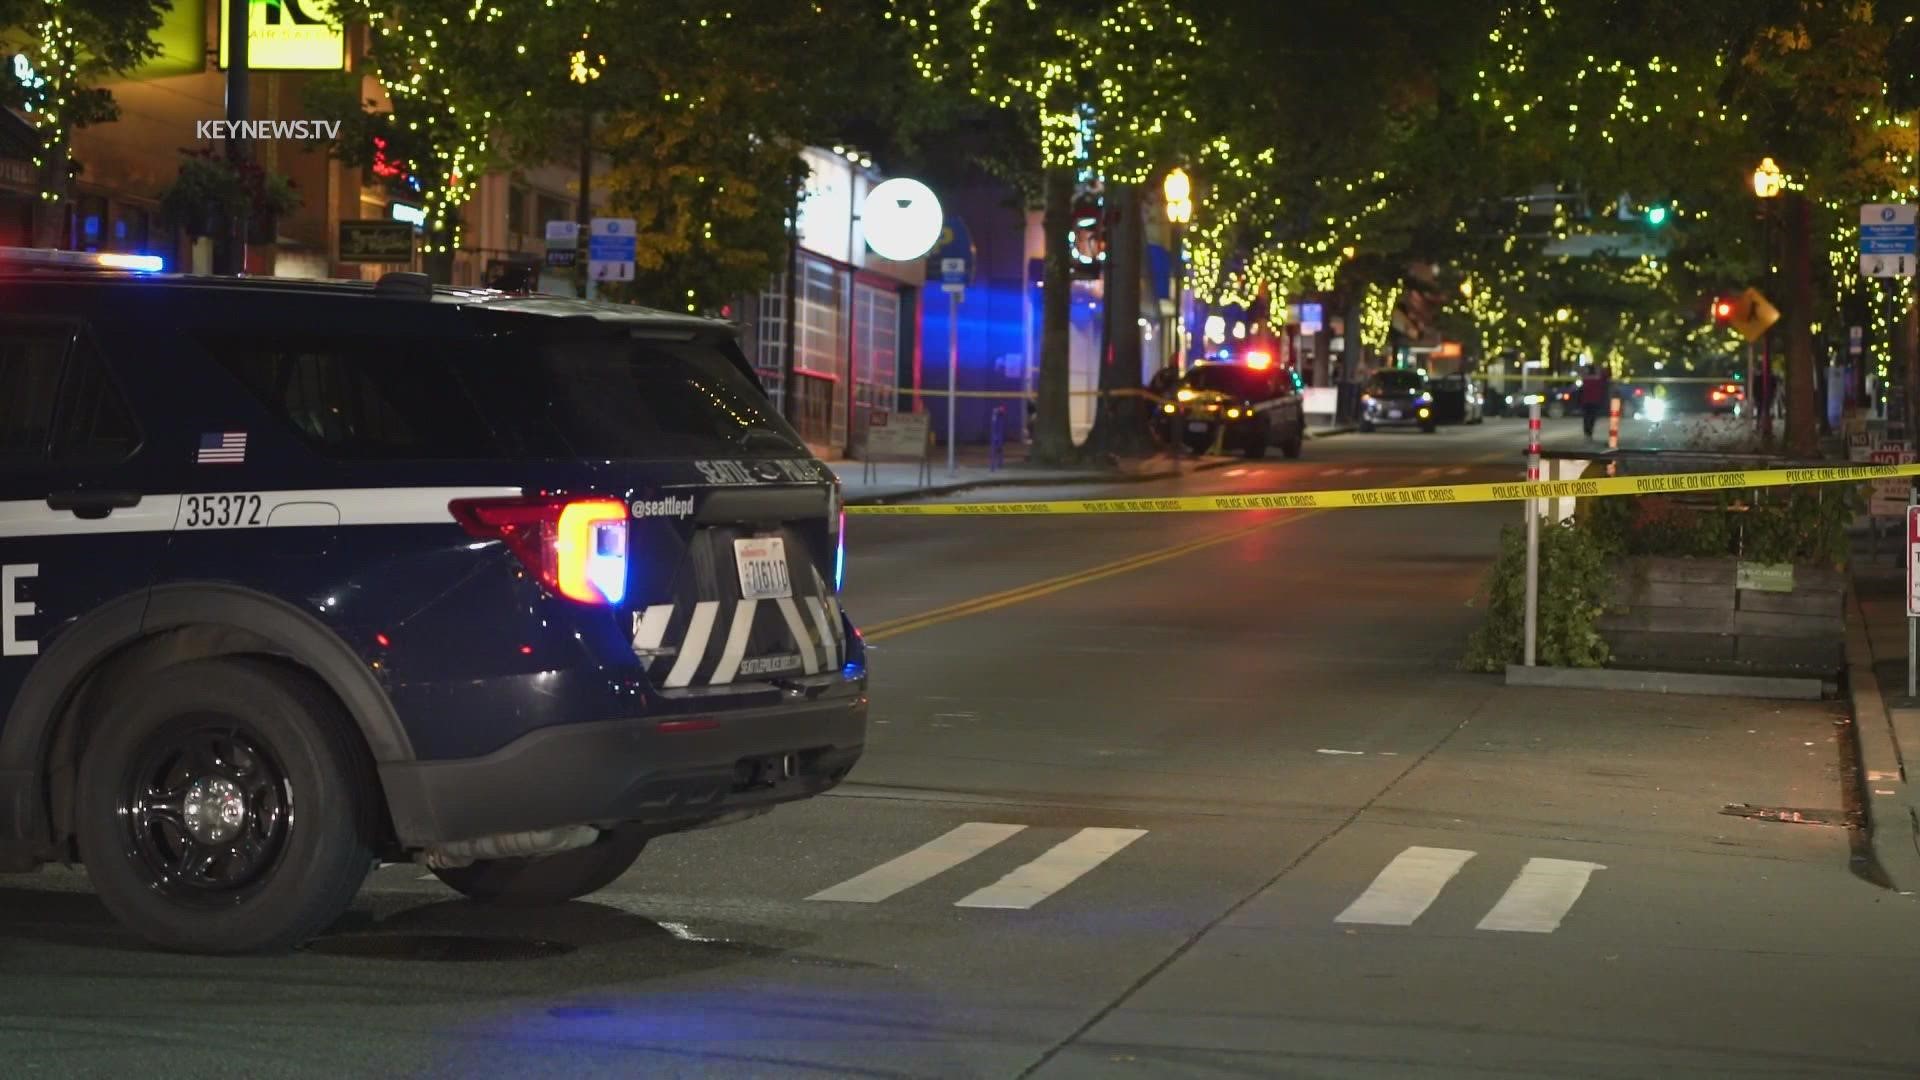 Police say a driver fleeing a shooting hit and killed a 21-year-old man.